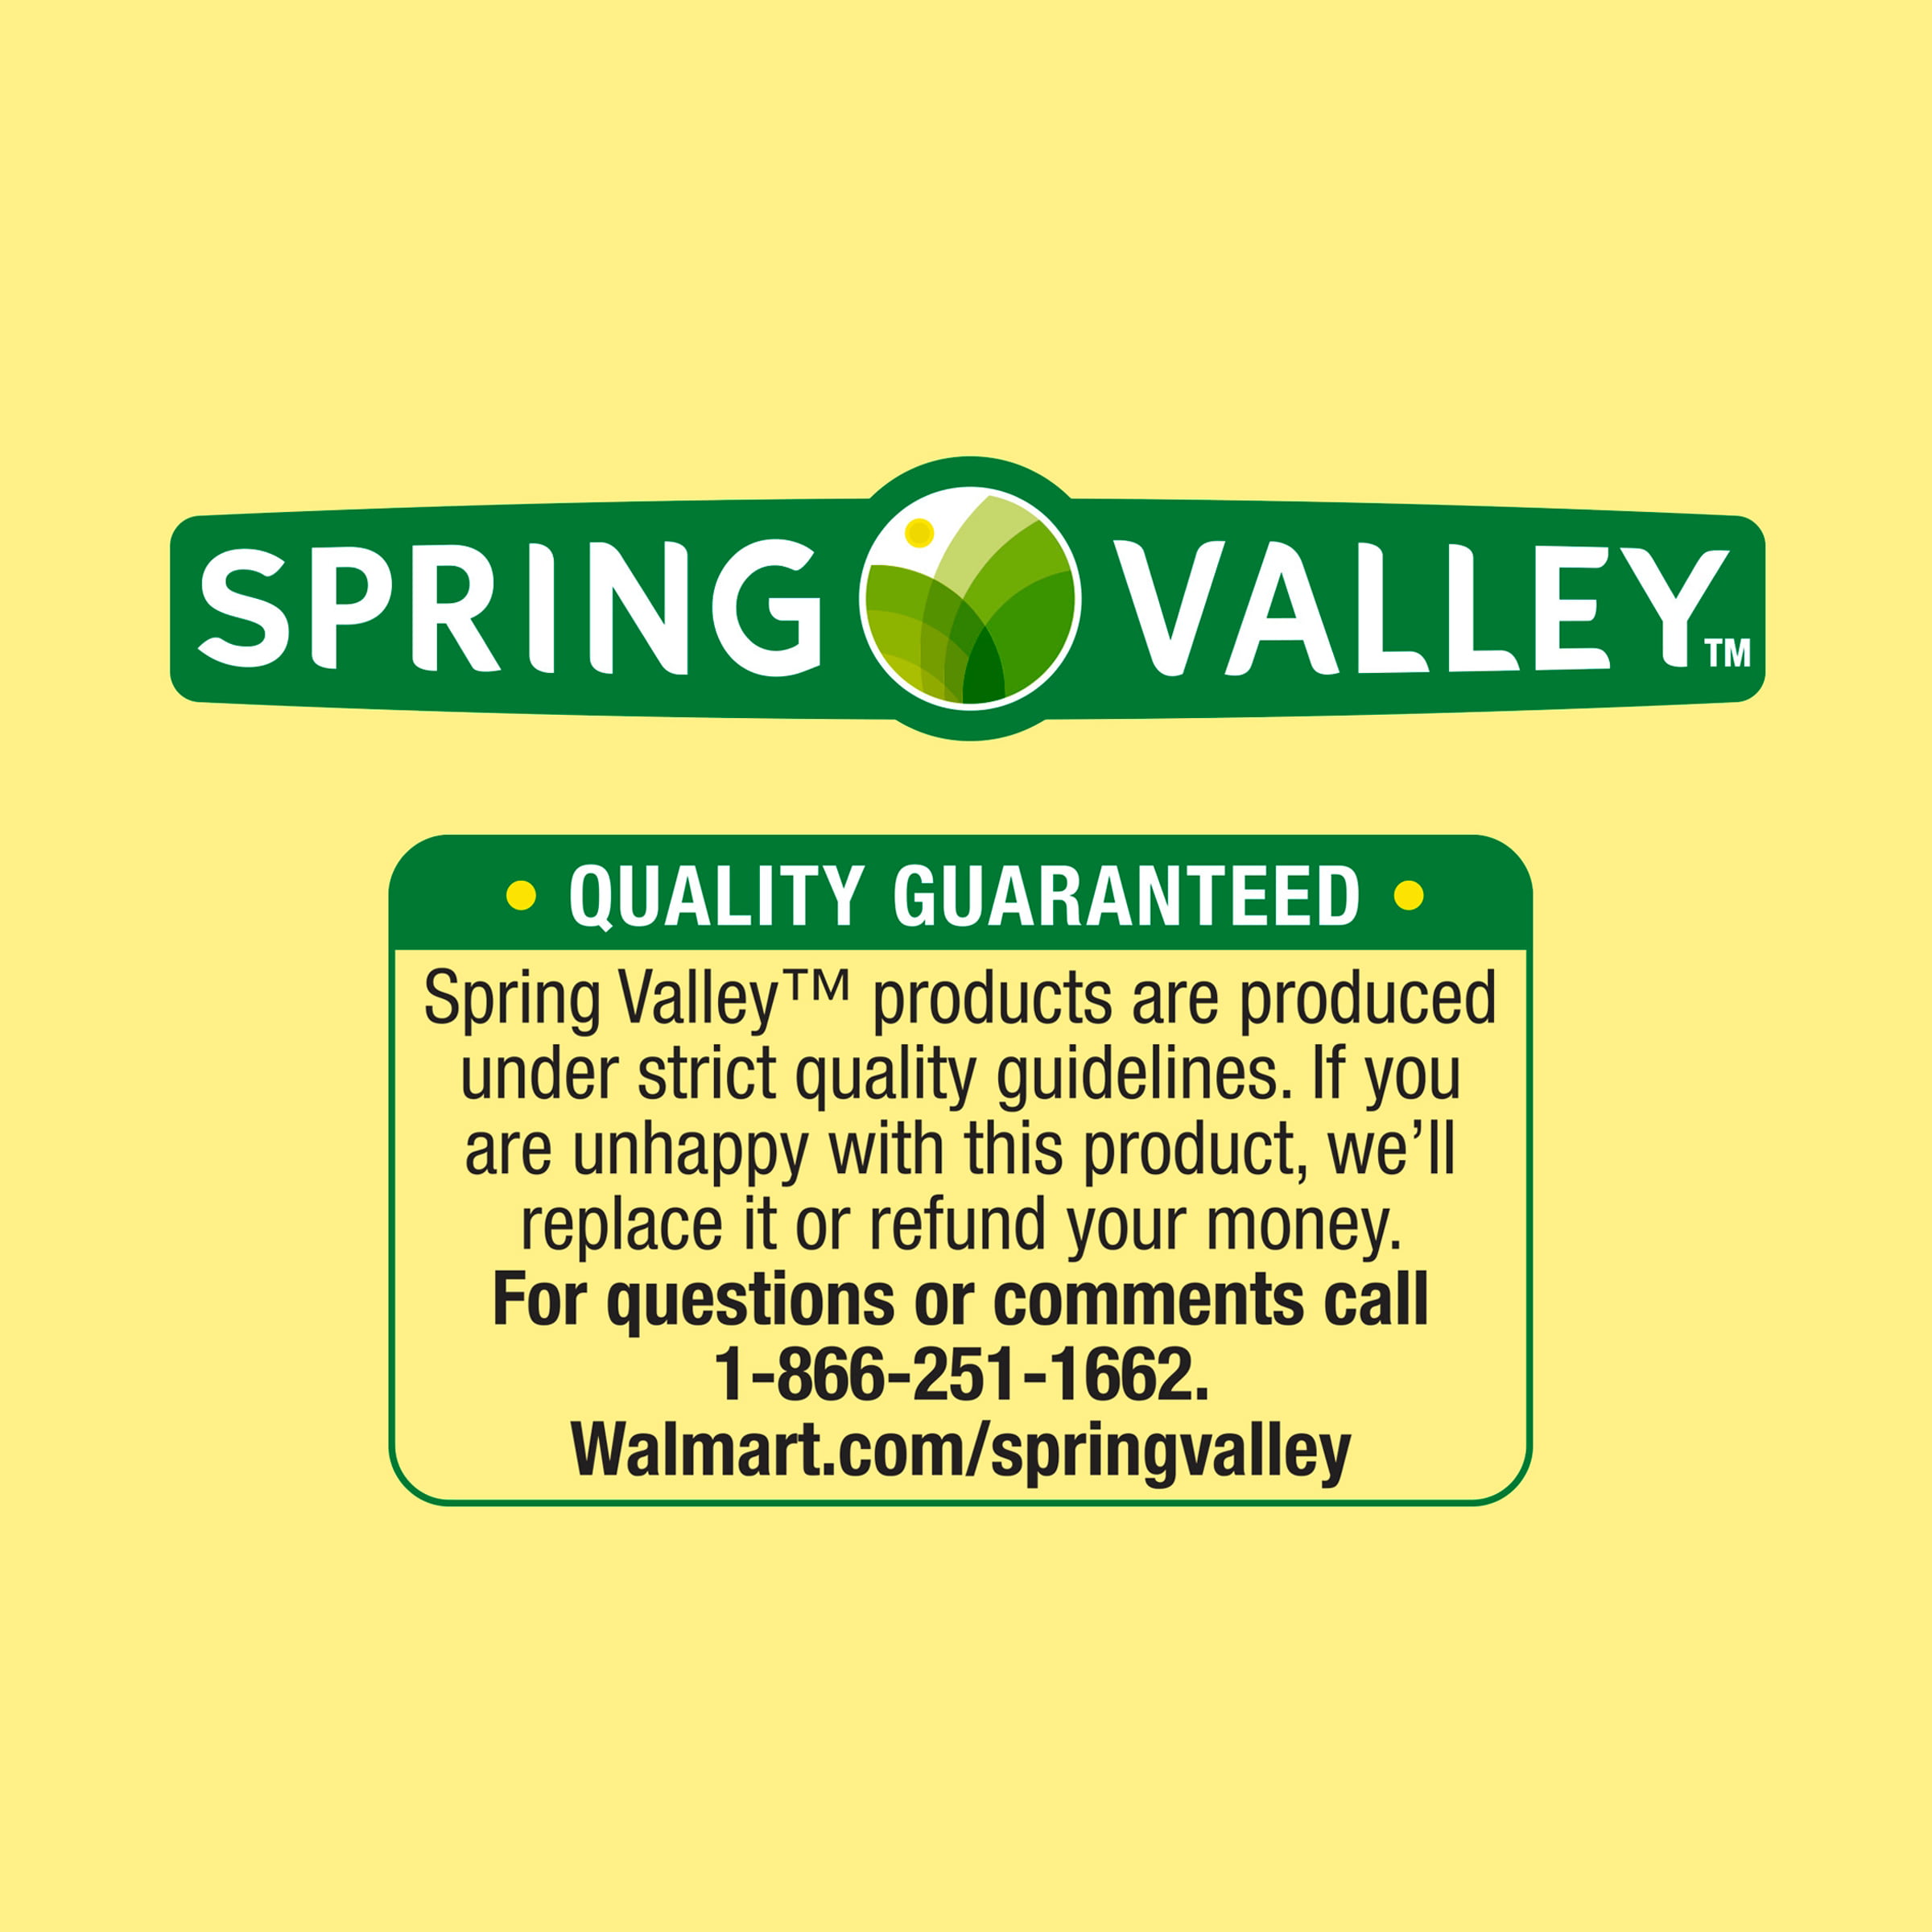 Spring Valley Green Tea Extract Capsules - 60ct